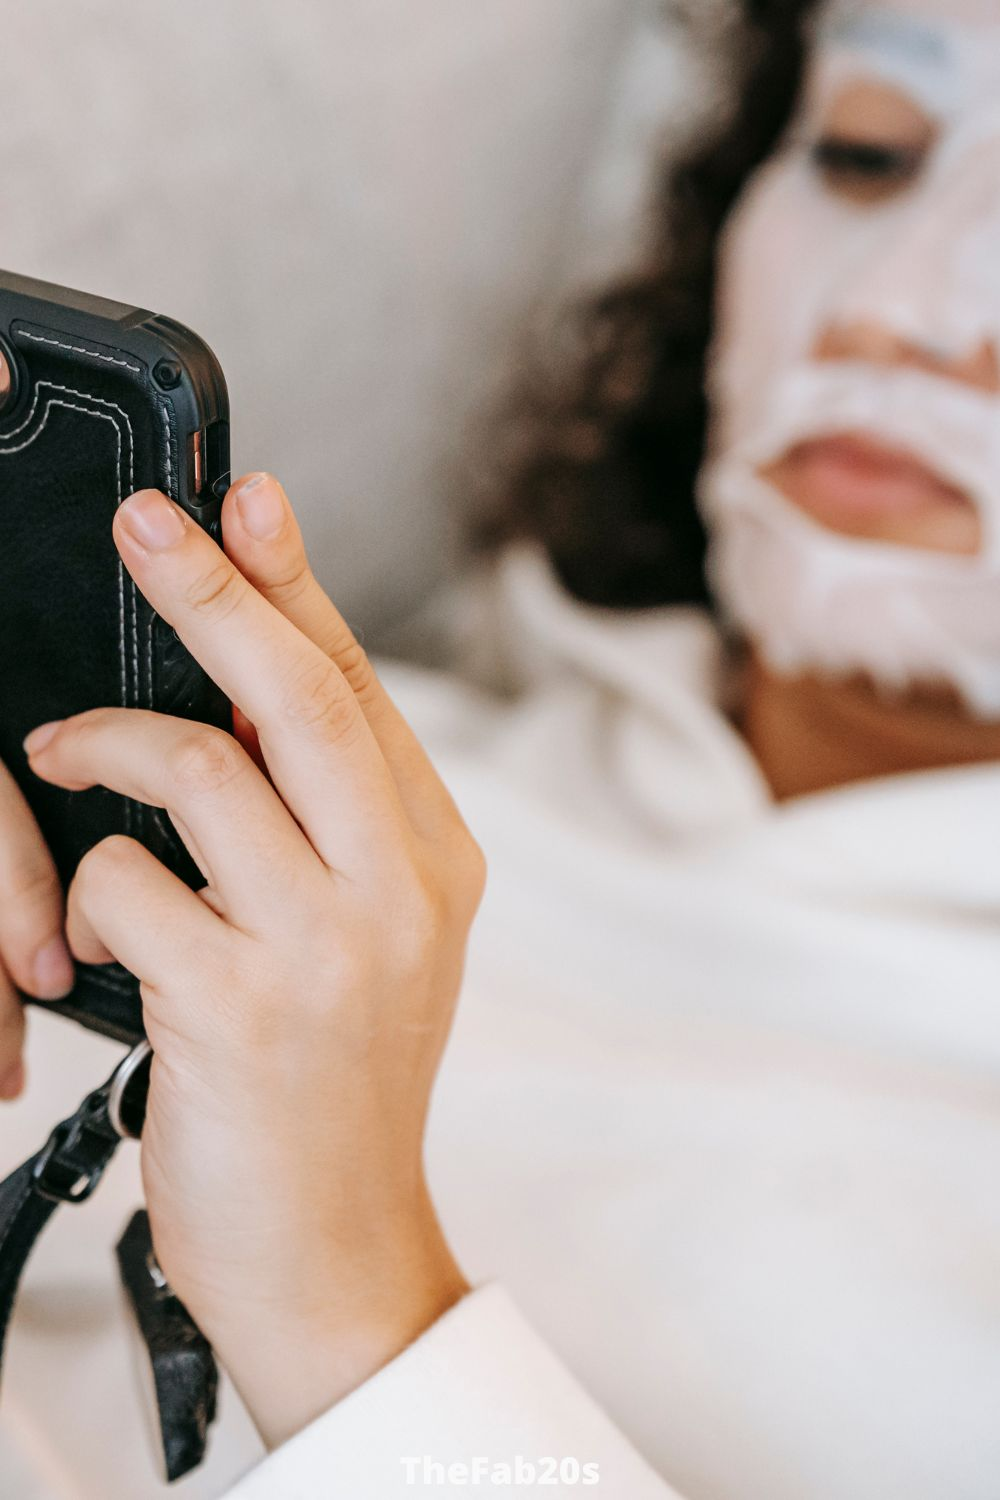 Woman with face mask checking phone